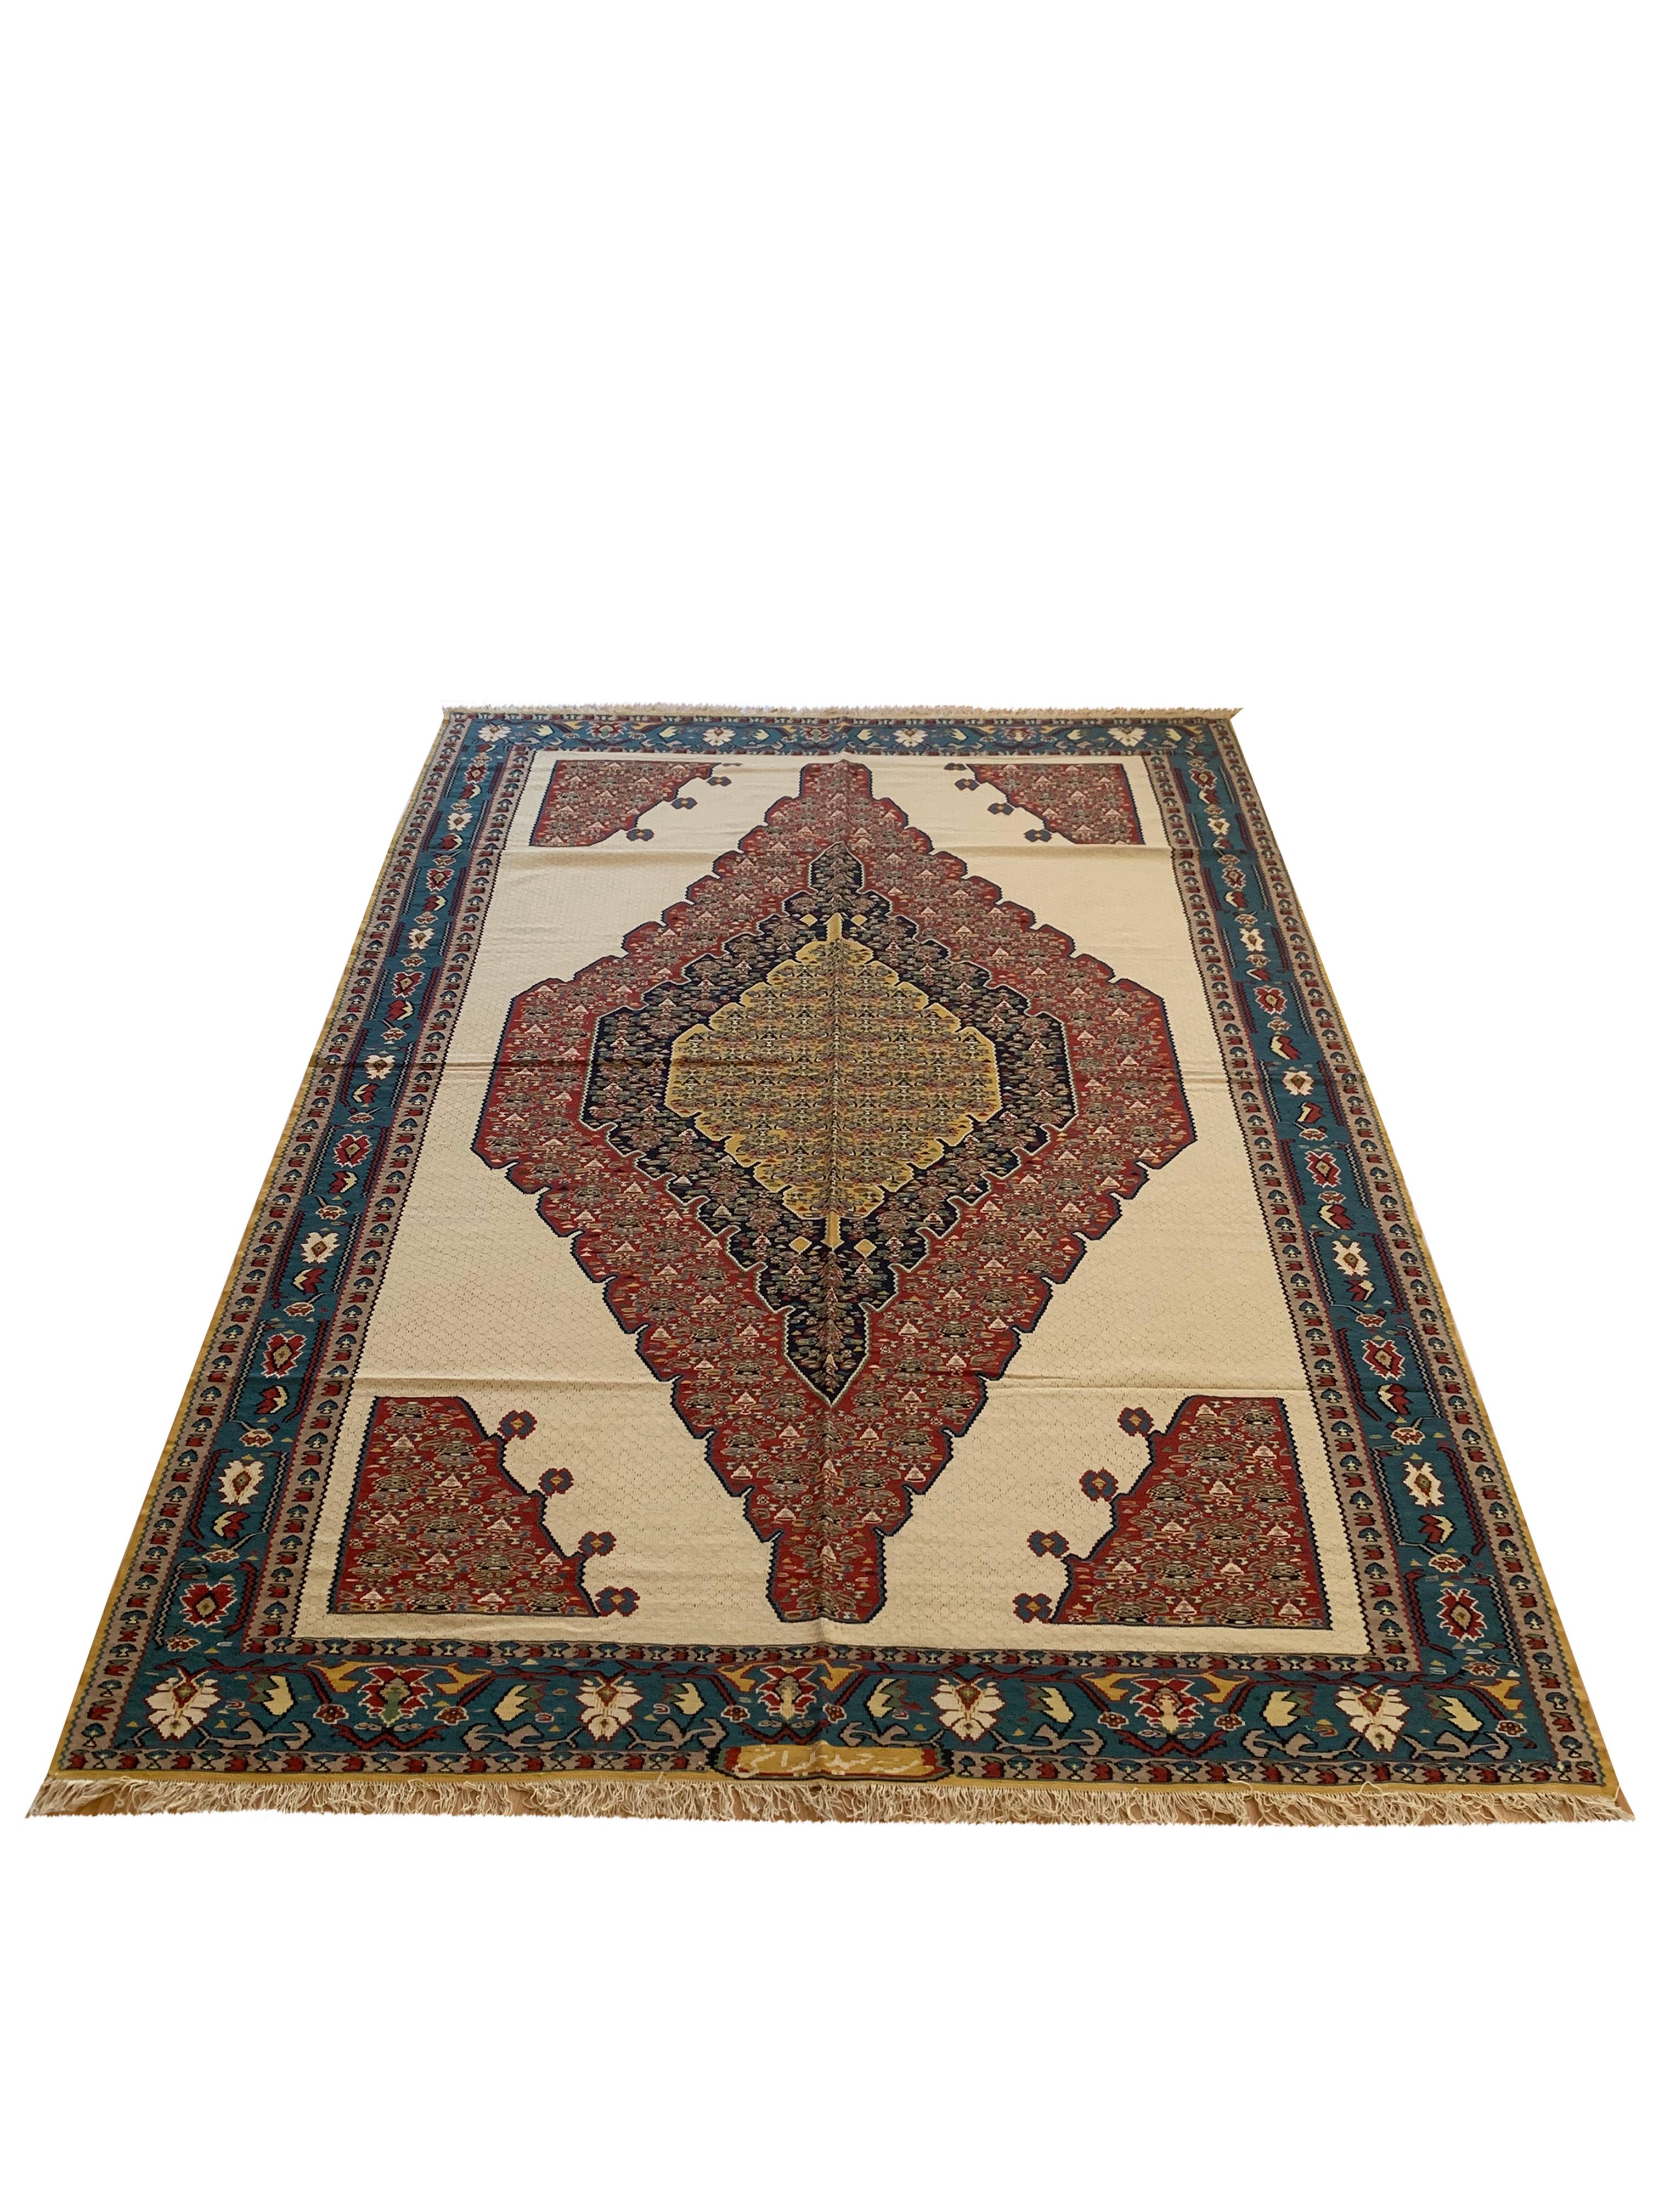 This beautiful silk and wool carpet is a handmade, flatwoven kilim woven in the early 21st century, circa 2010. This Geometric rug is brand new and so is in excellent condition. The design features a cream background with a layered central medallion